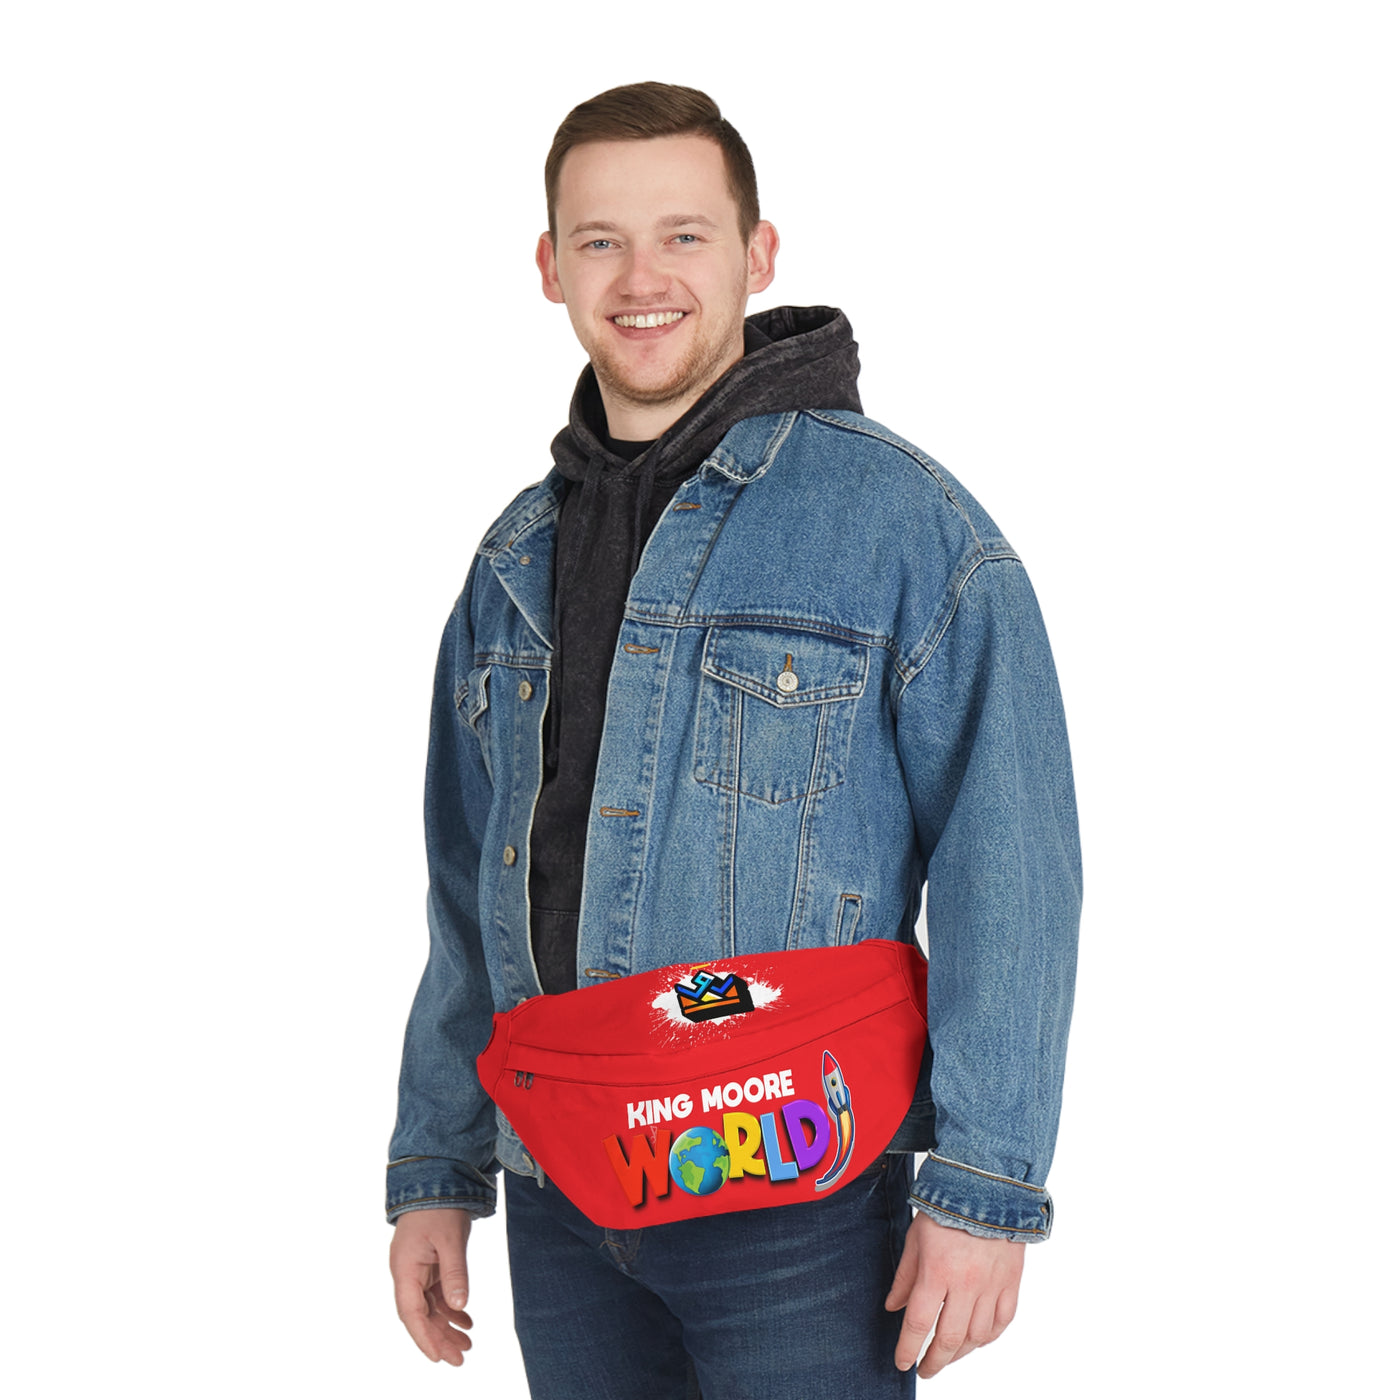 King Moore World Large Fanny Pack (Red)